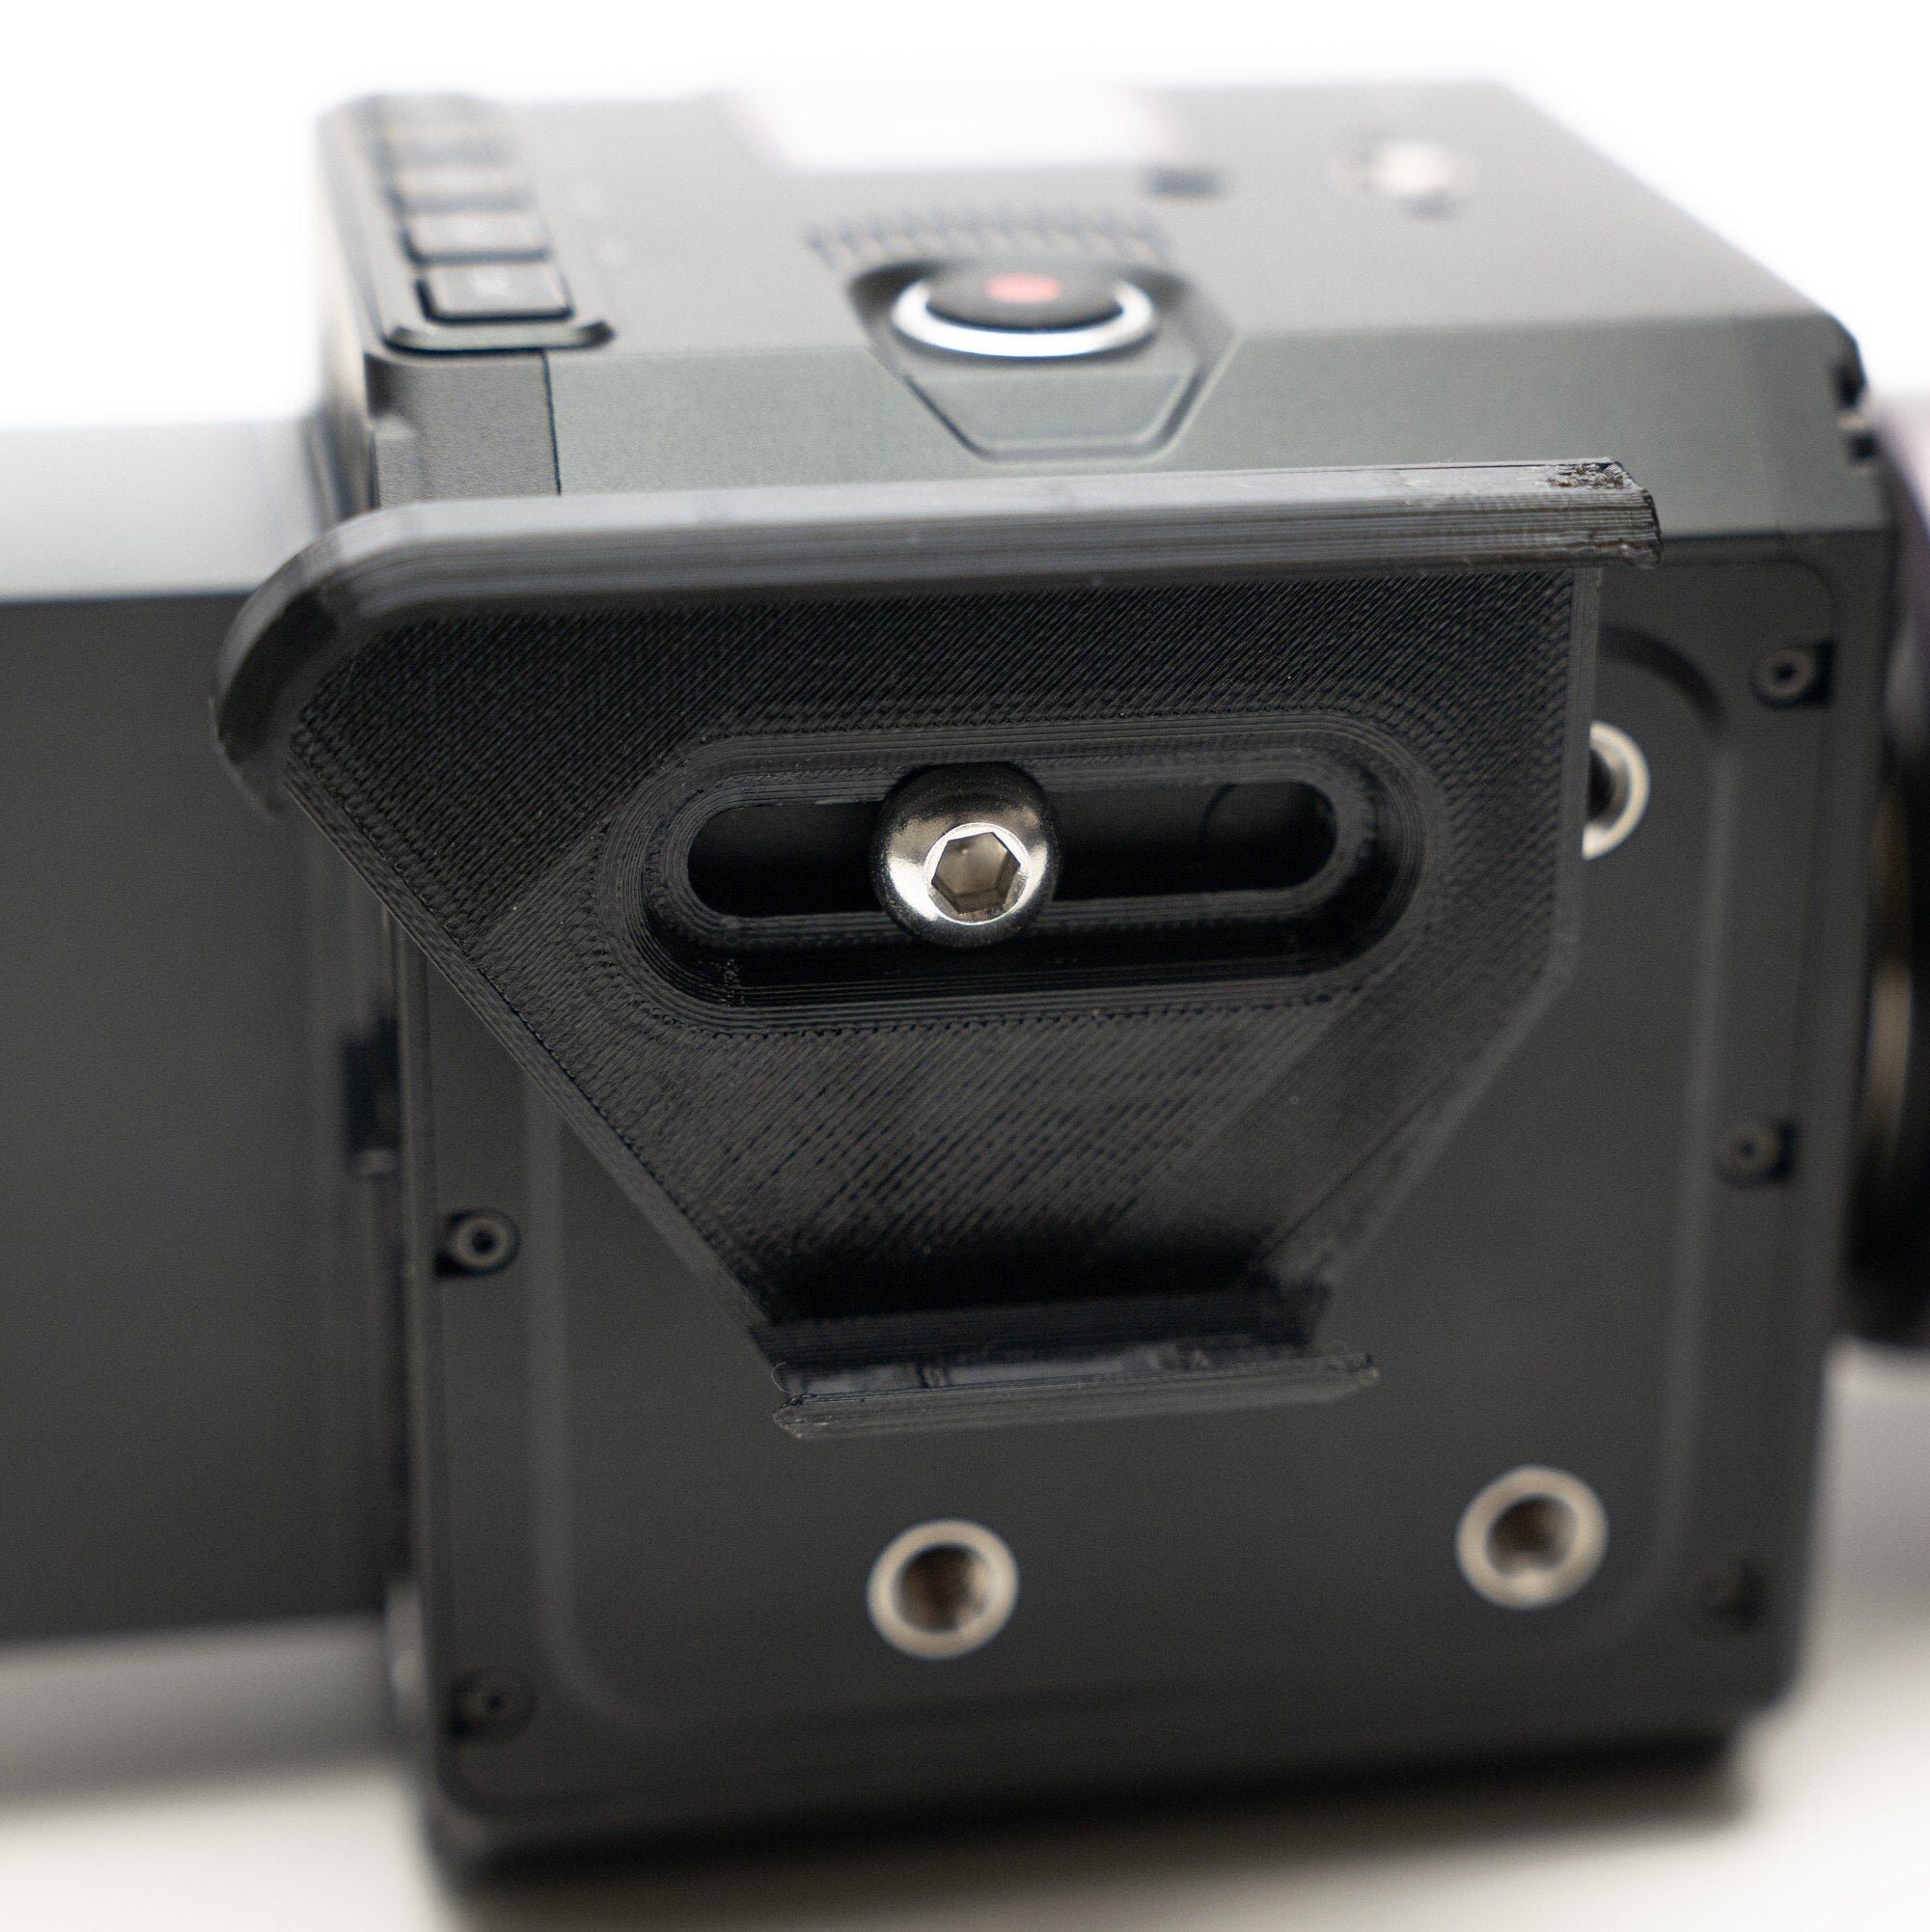 3d Printed Camera Cage Mount for Crucial X8 SSD 